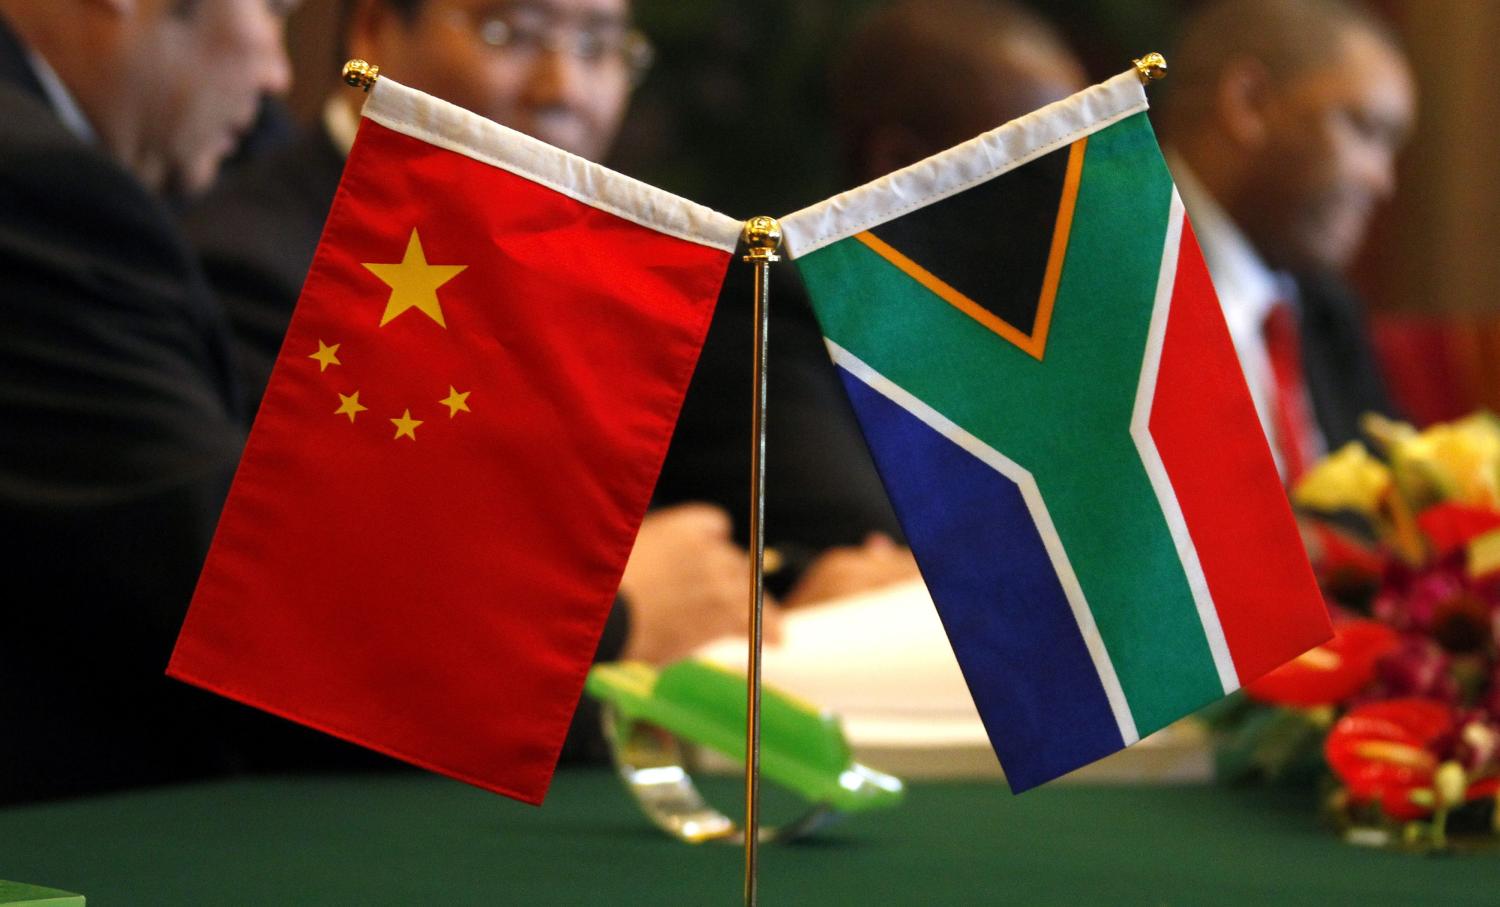 The South African and Chinese national flags sit atop a table as businessmen sign contracts during the China-South Africa Business Forum in Beijing August 24, 2010. South African President Jacob Zuma called on Tuesday for greater investment in his country from China, as South Africa seeks to narrow its trade deficit with Beijing and bring growth to its sluggish economy. South Africa is looking for expanded trade that will help it meet its development needs, especially by improving infrastructure and livelihoods, Zuma told a forum of company executives from China and South Africa. REUTERS/David Gray